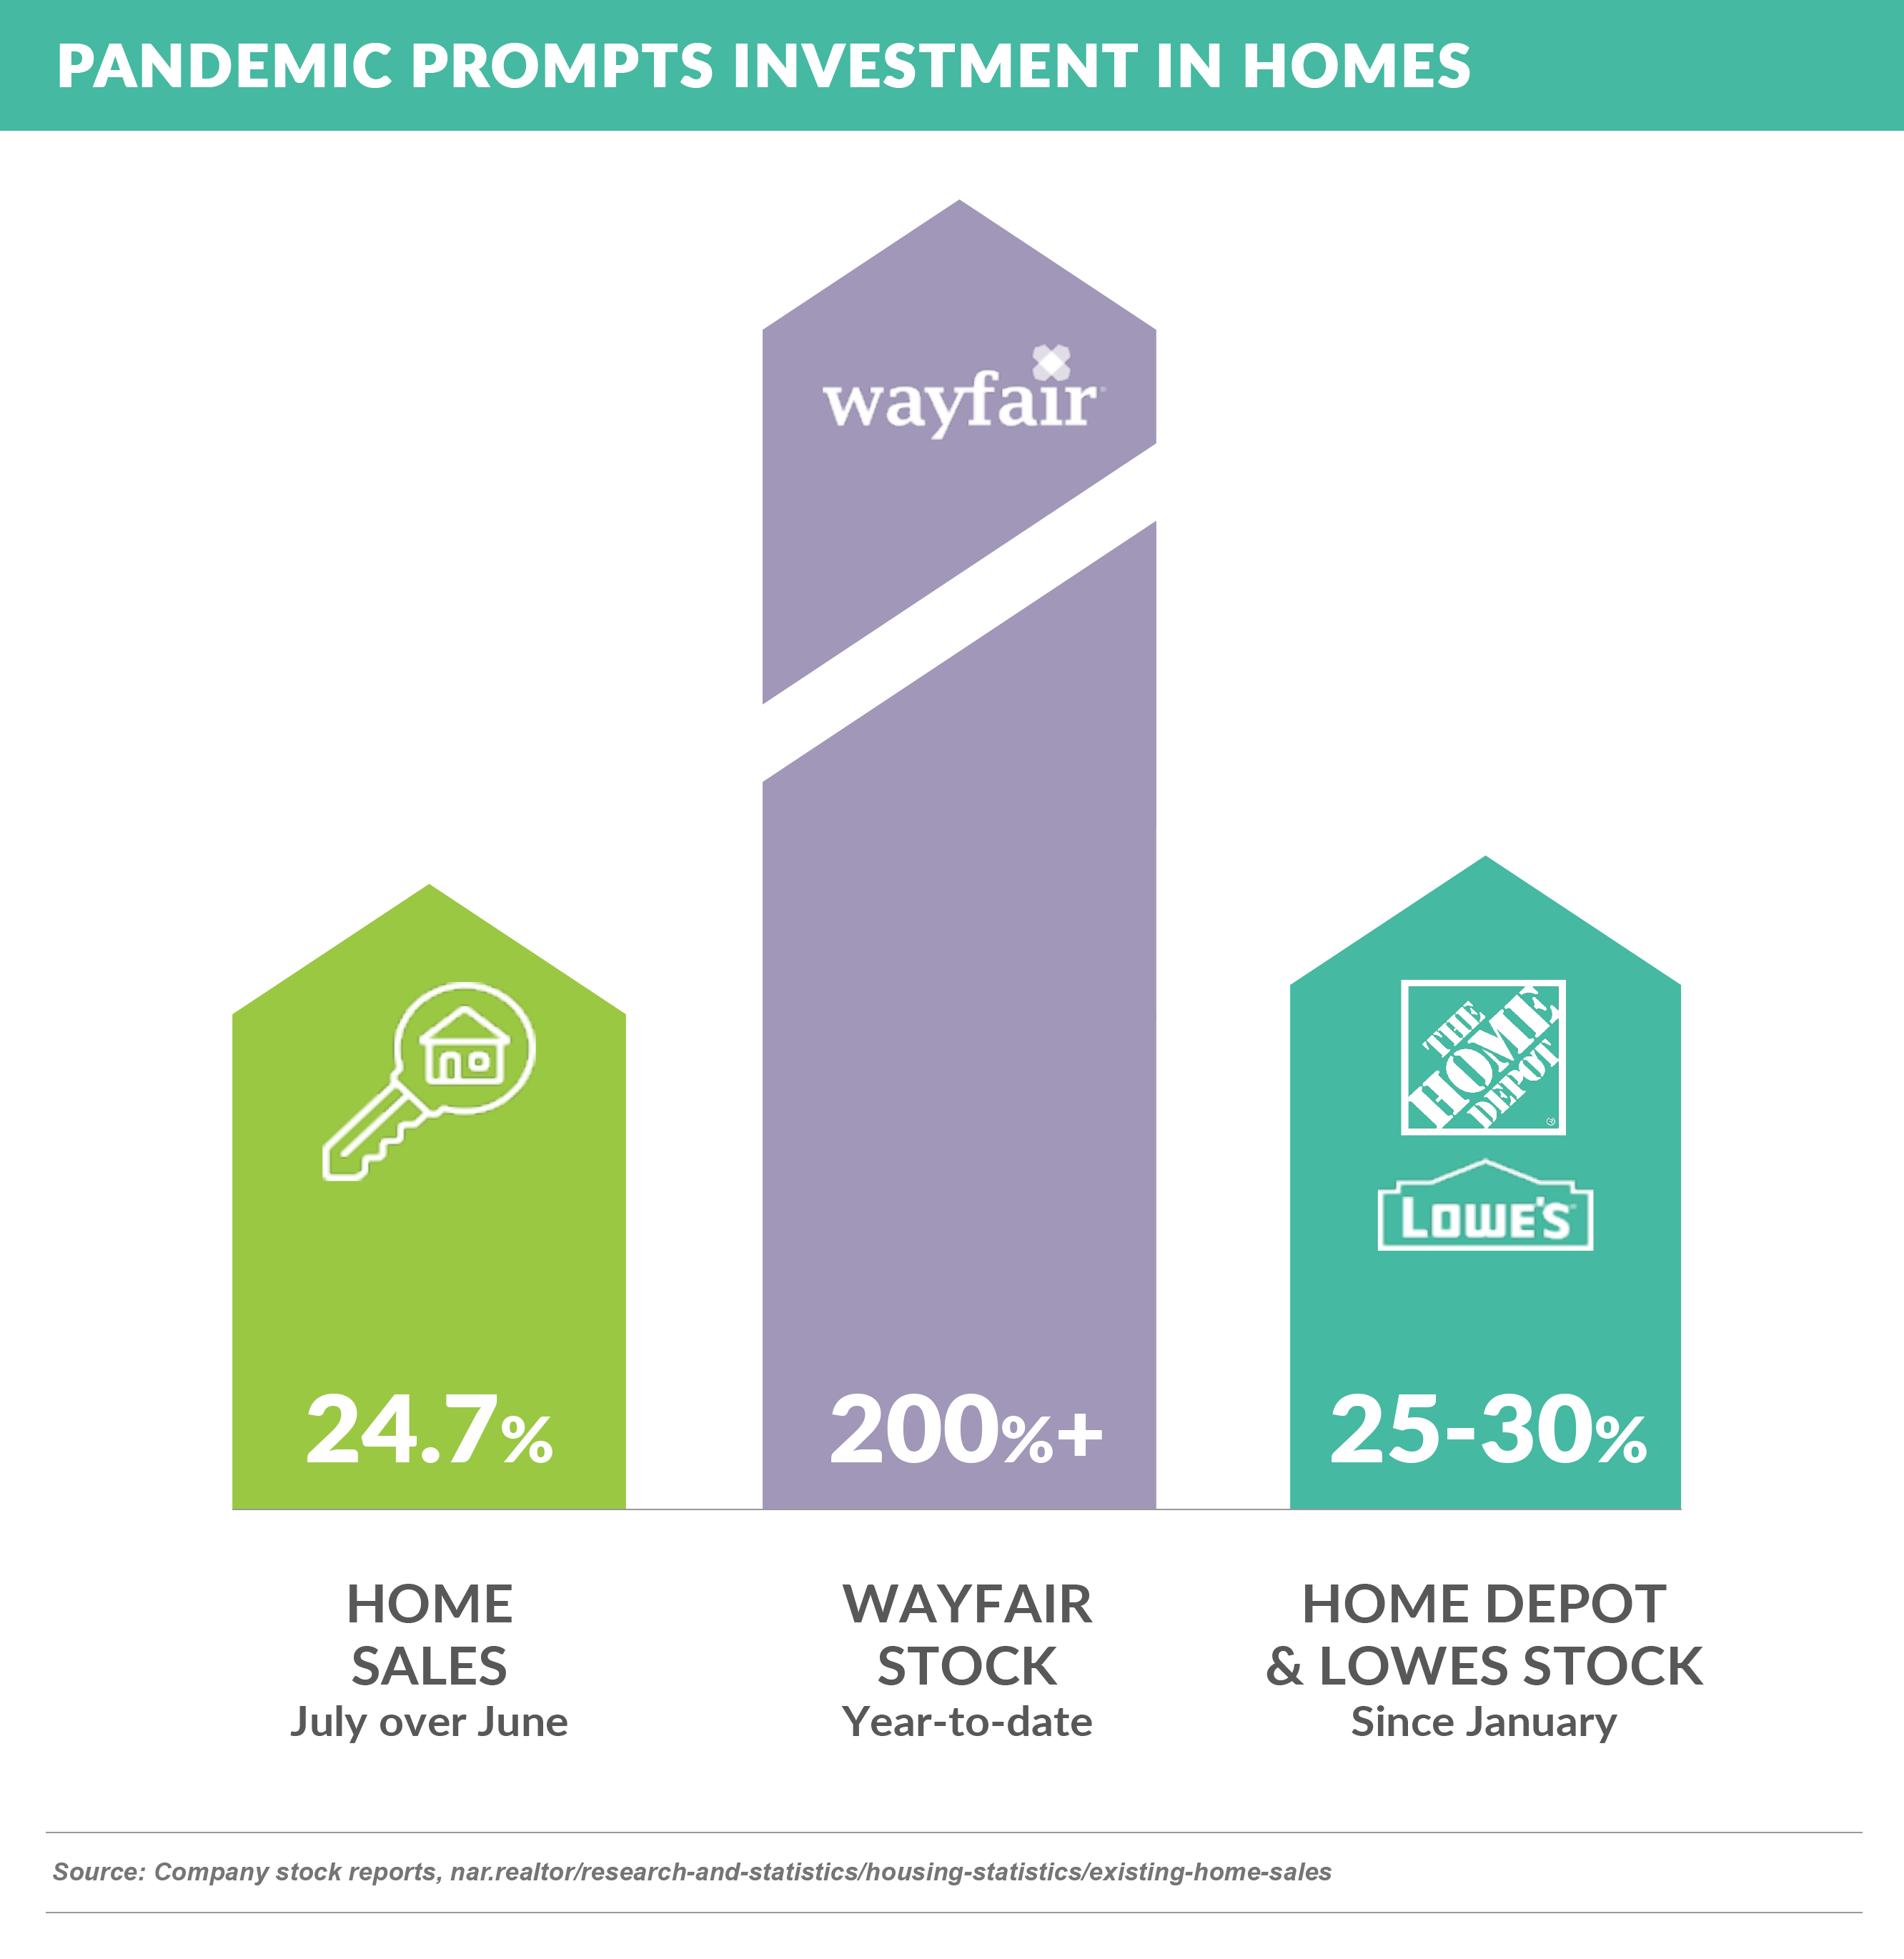 PANDEMIC PROMPTS INVESTMENT IN HOMES